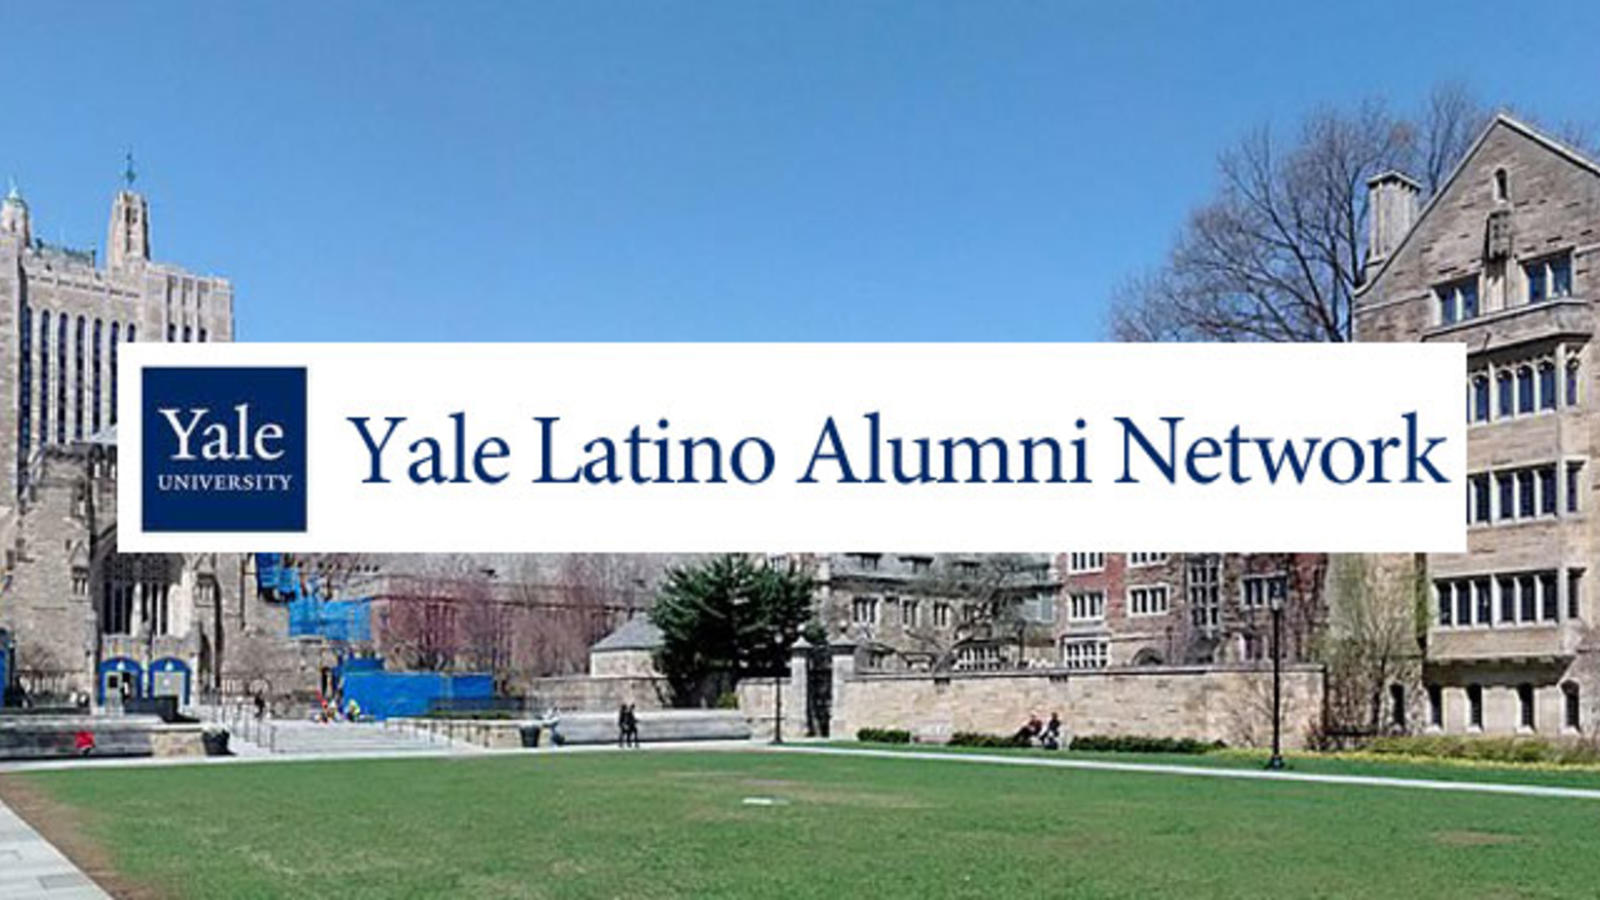 Yale Latino Alumni Network banner in front of building